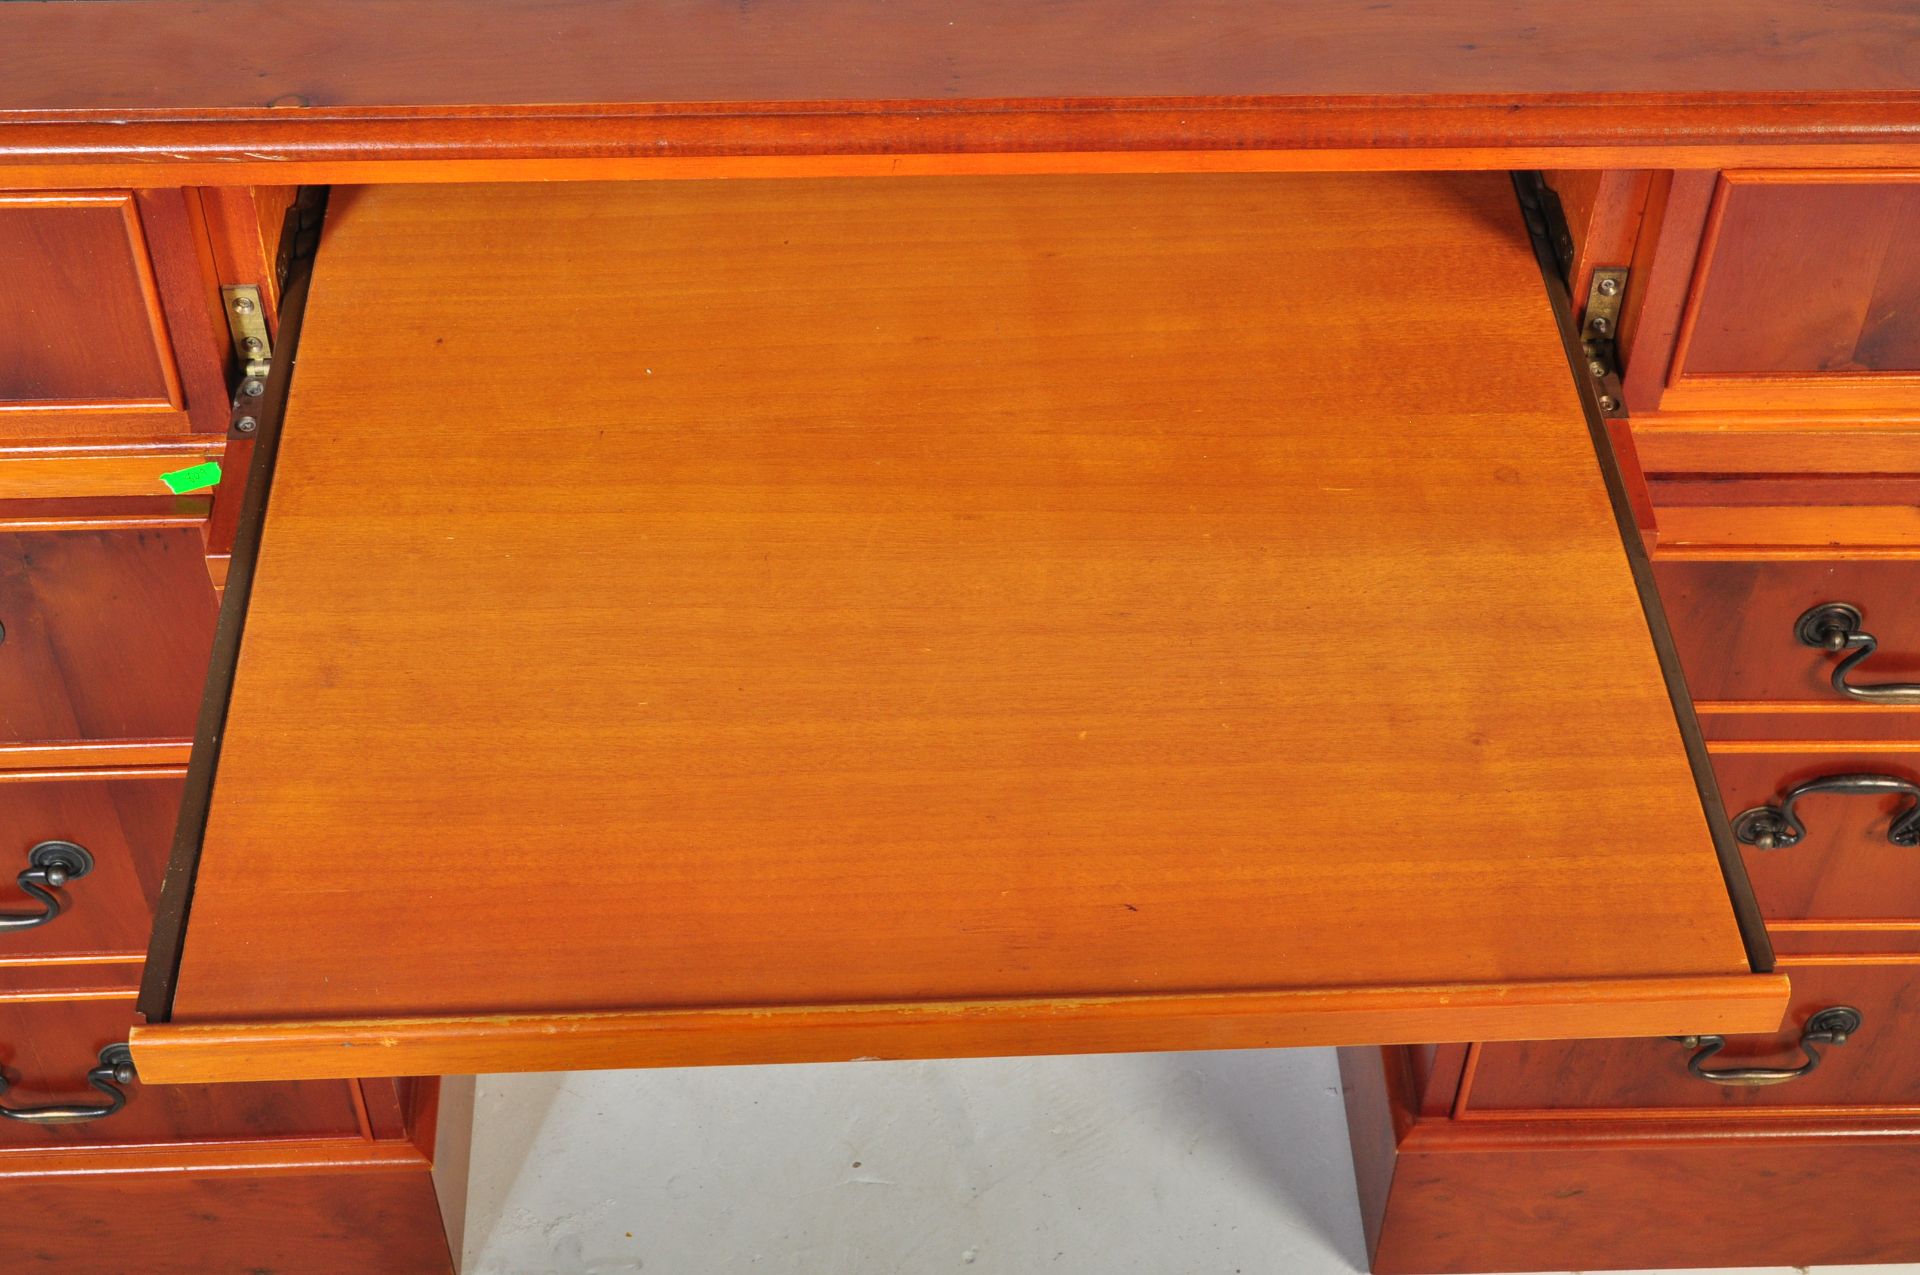 VINTAGE 20TH CENTURY TWIN PEDESTAL DESK WITH DRAWERS - Image 6 of 7